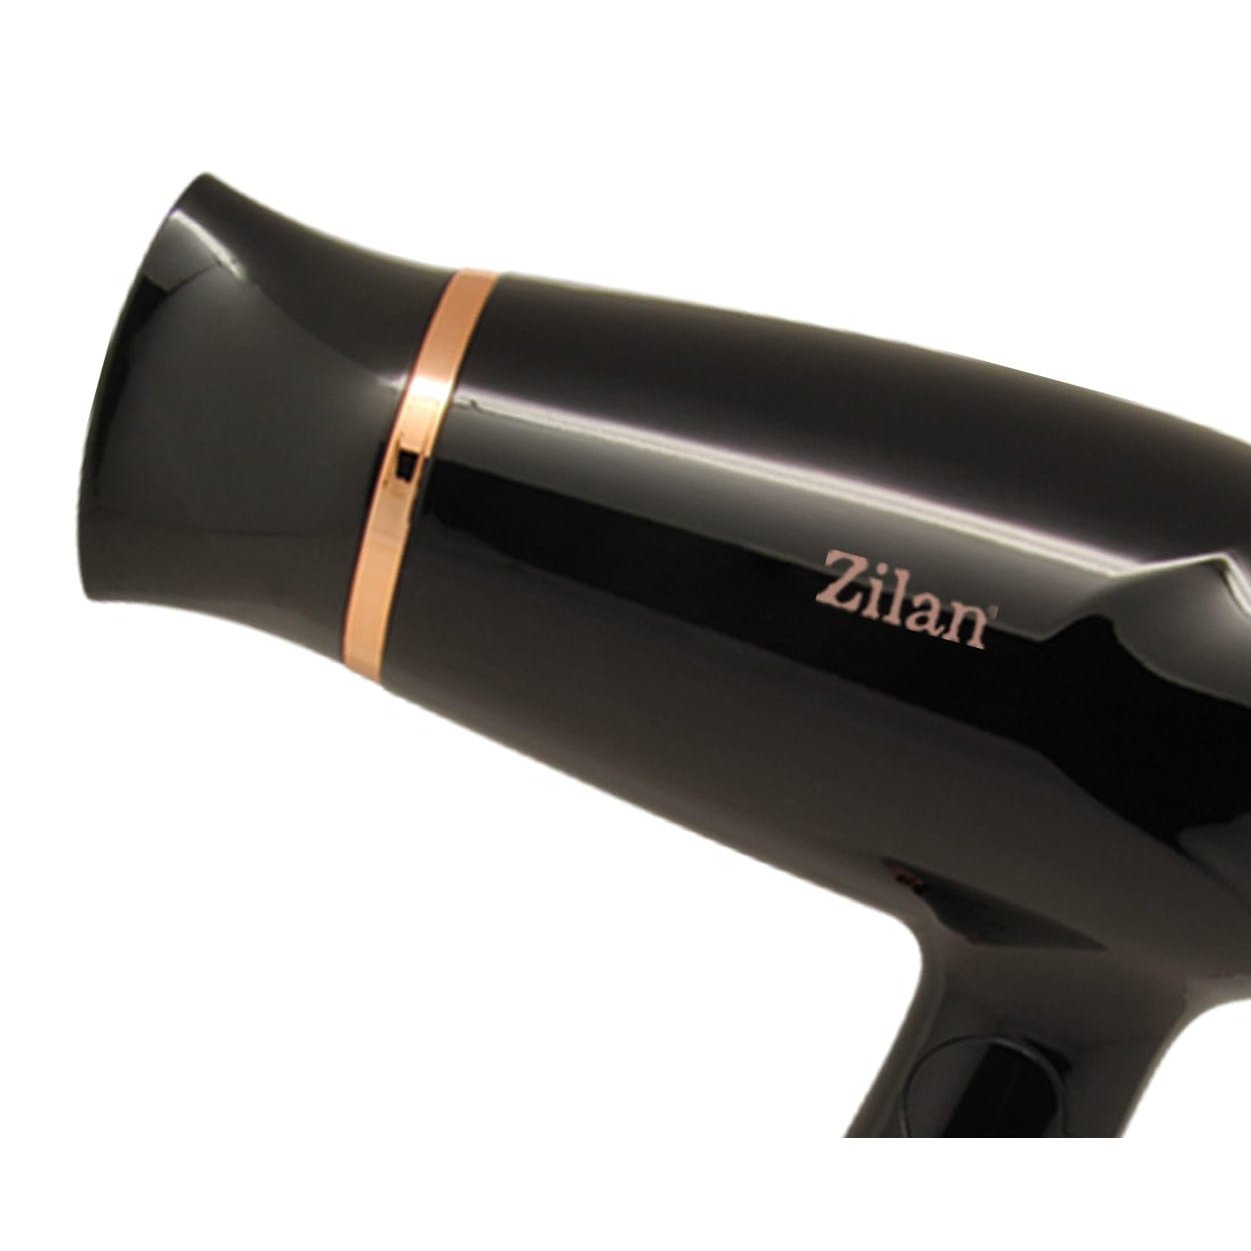 Buy Zilan Hair Dryer 1200W - ZLN2953 | Shop at Supply Master Accra, Ghana Home Accessories Buy Tools hardware Building materials